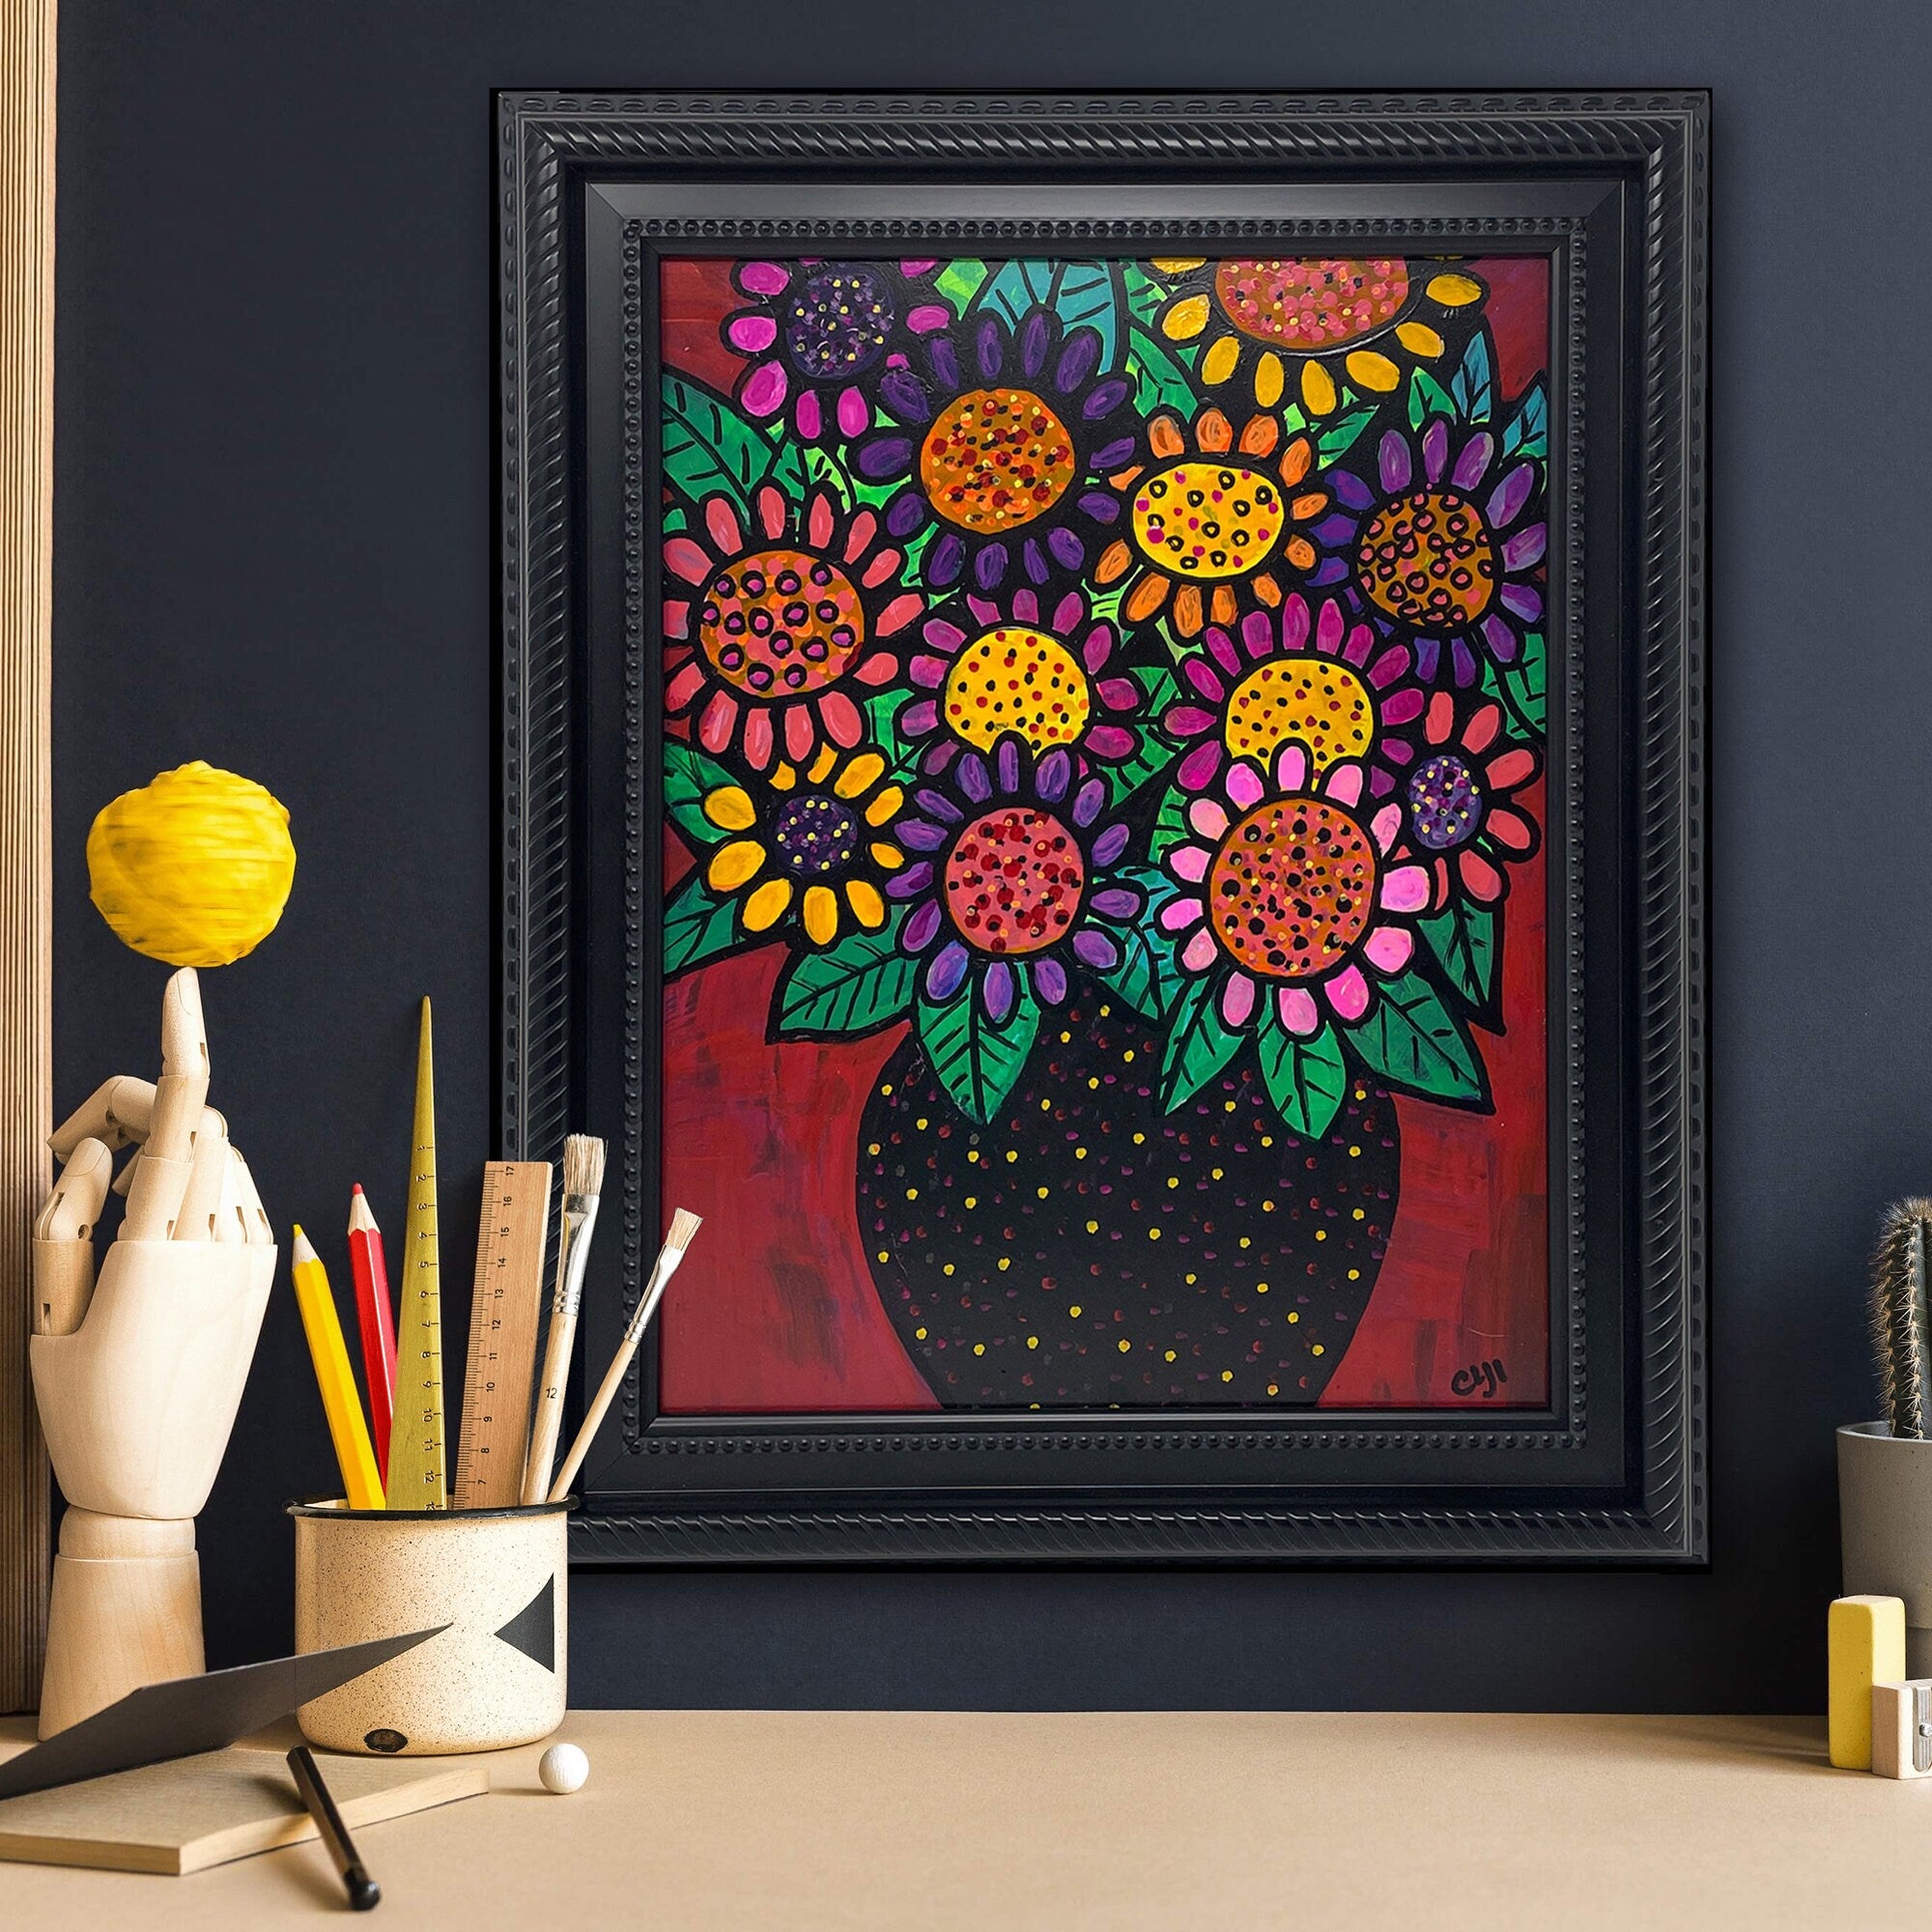 Whimsical Abstract Flower Painting - Original Contemporary Art - Colorful Floral Still Life in Red, Yellow, Purple, Orange, Green, Black